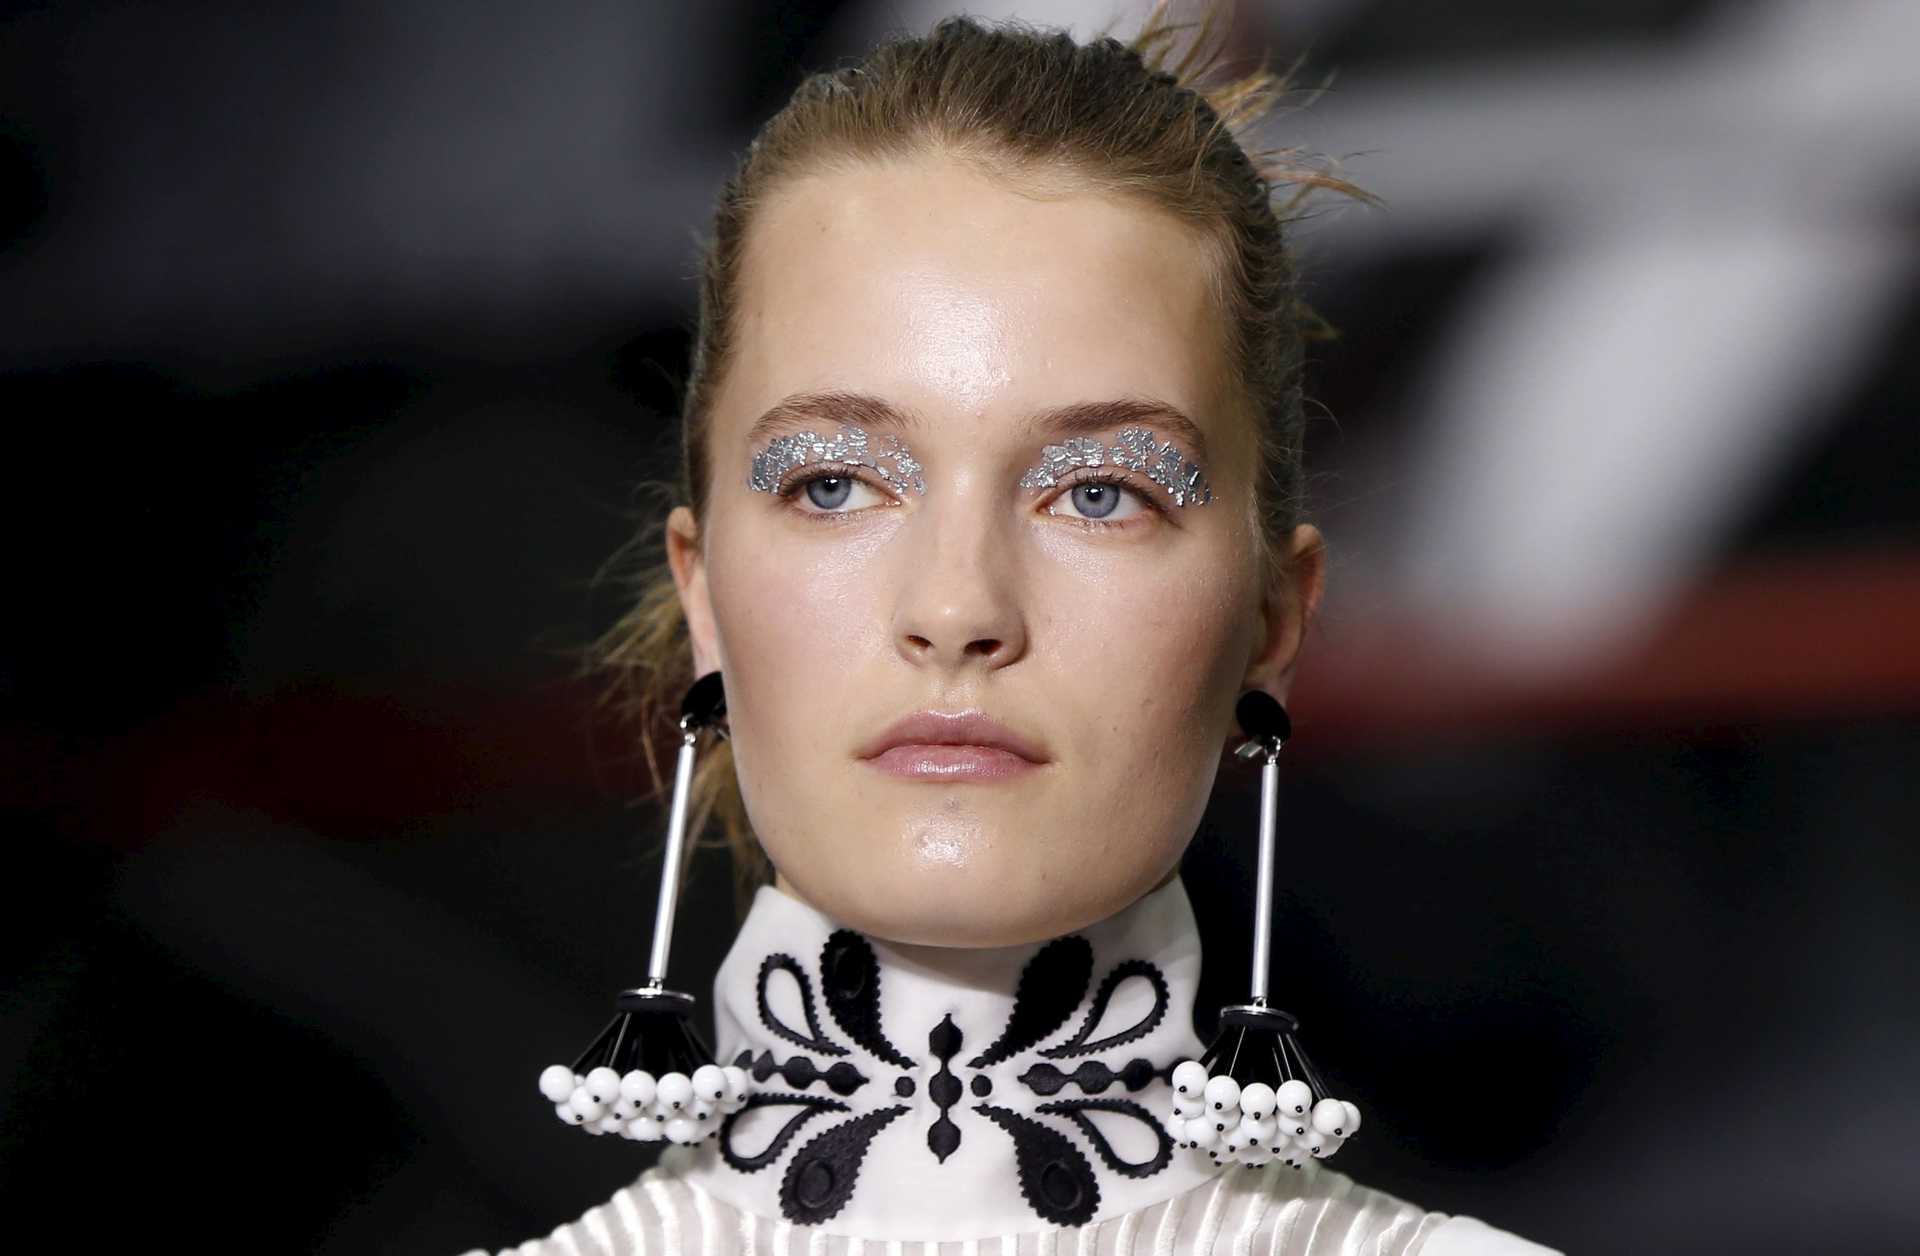 A model presents a creation at the Holly Fulton catwalk show at London Fashion Week Autumn/Winter 2016 in London, Britain